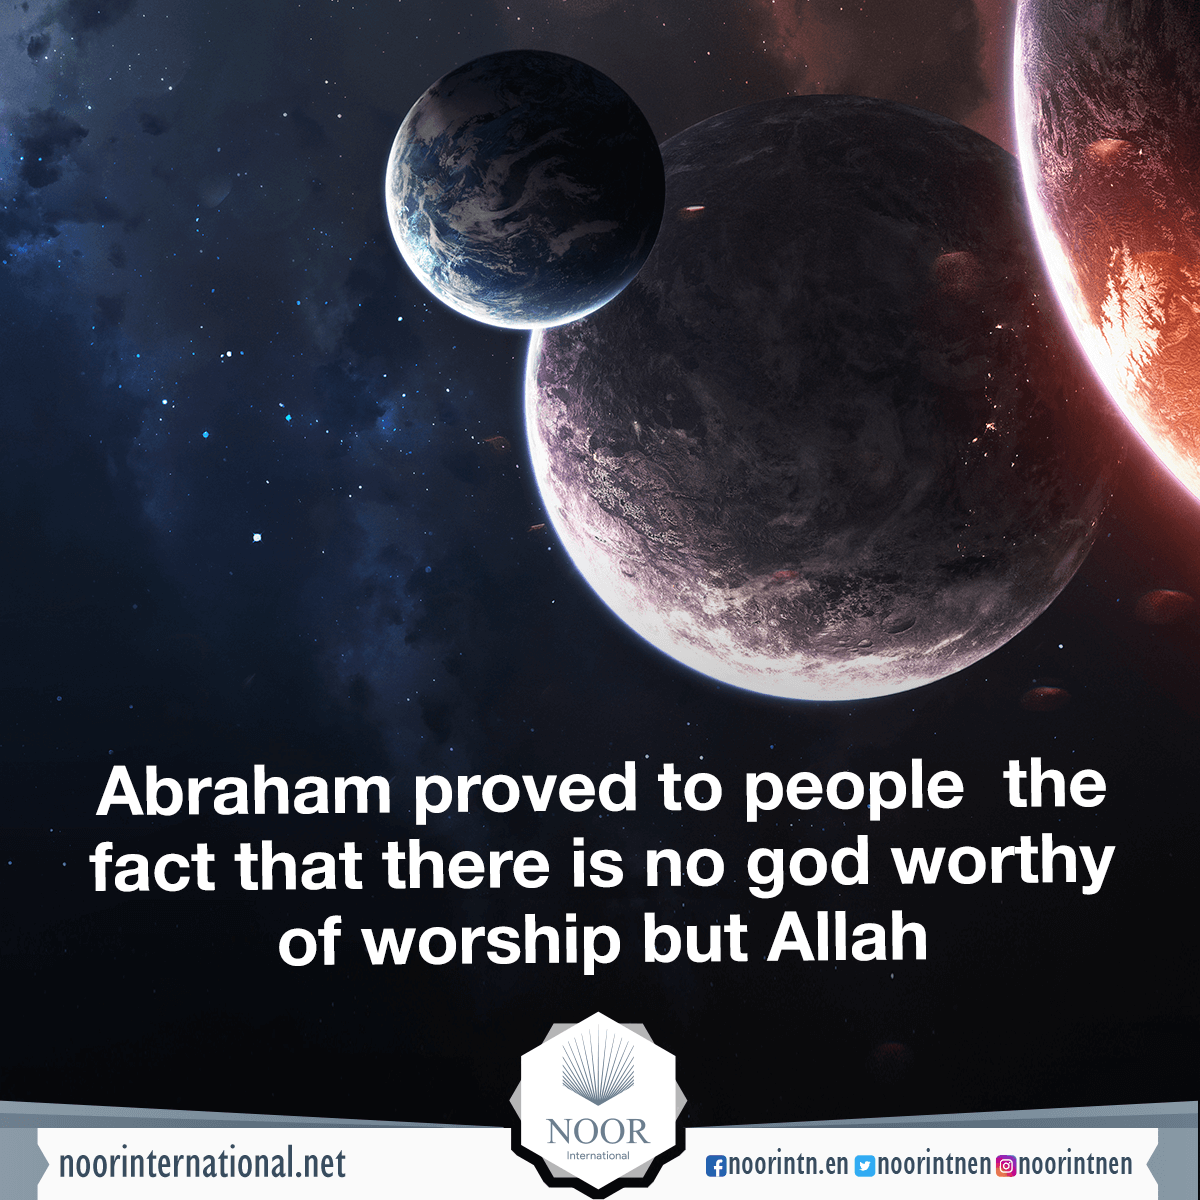 Abraham proved to people the fact that there is no god worthy of worship but Allah